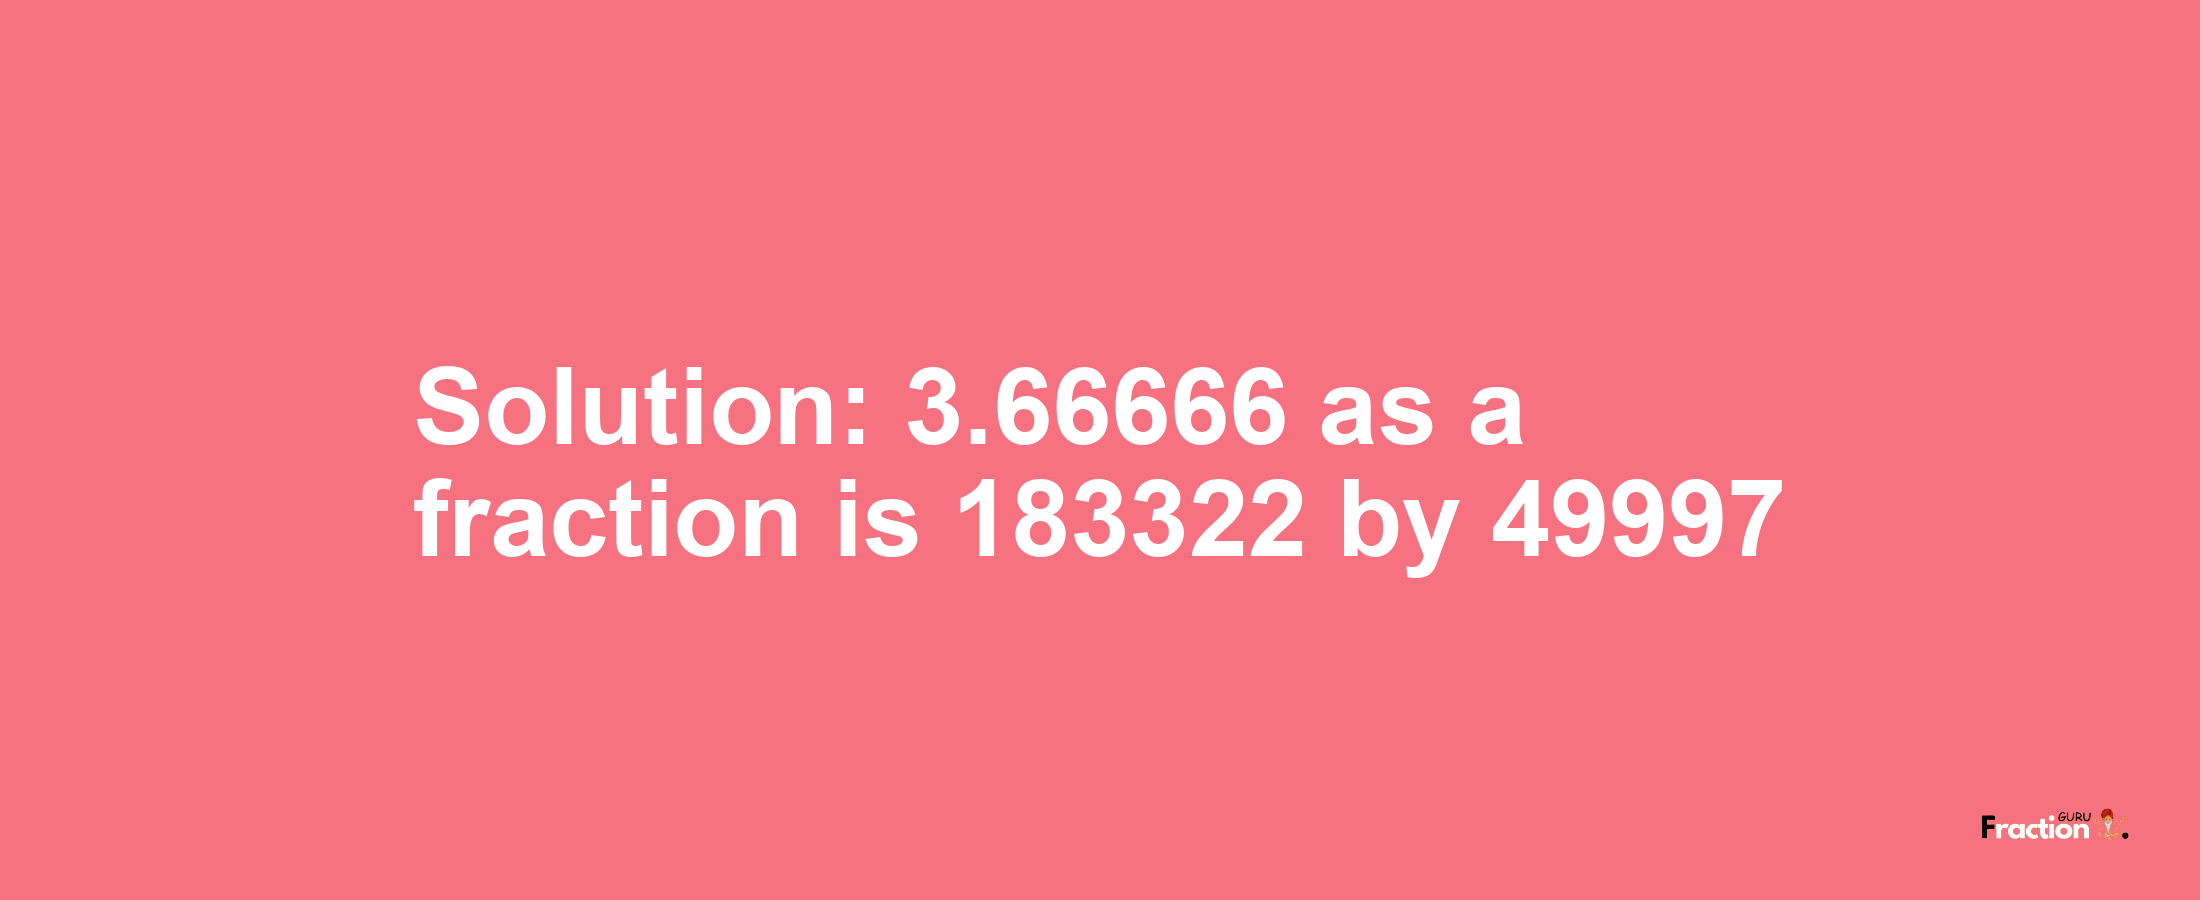 Solution:3.66666 as a fraction is 183322/49997